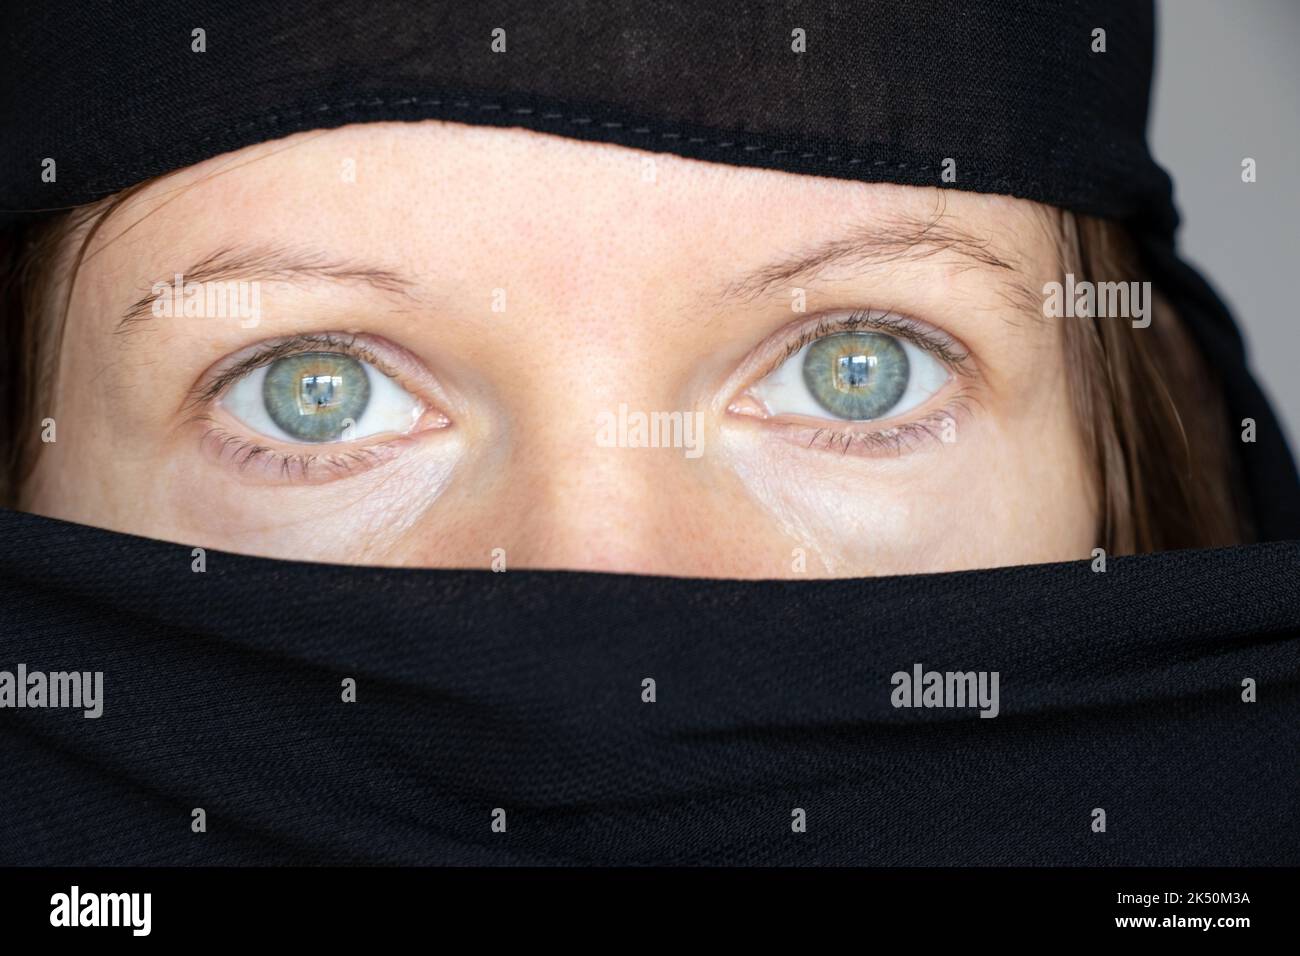 The girl covered her face and head with a black scarf on an isolated background, the faith and religion is Muslim Stock Photo